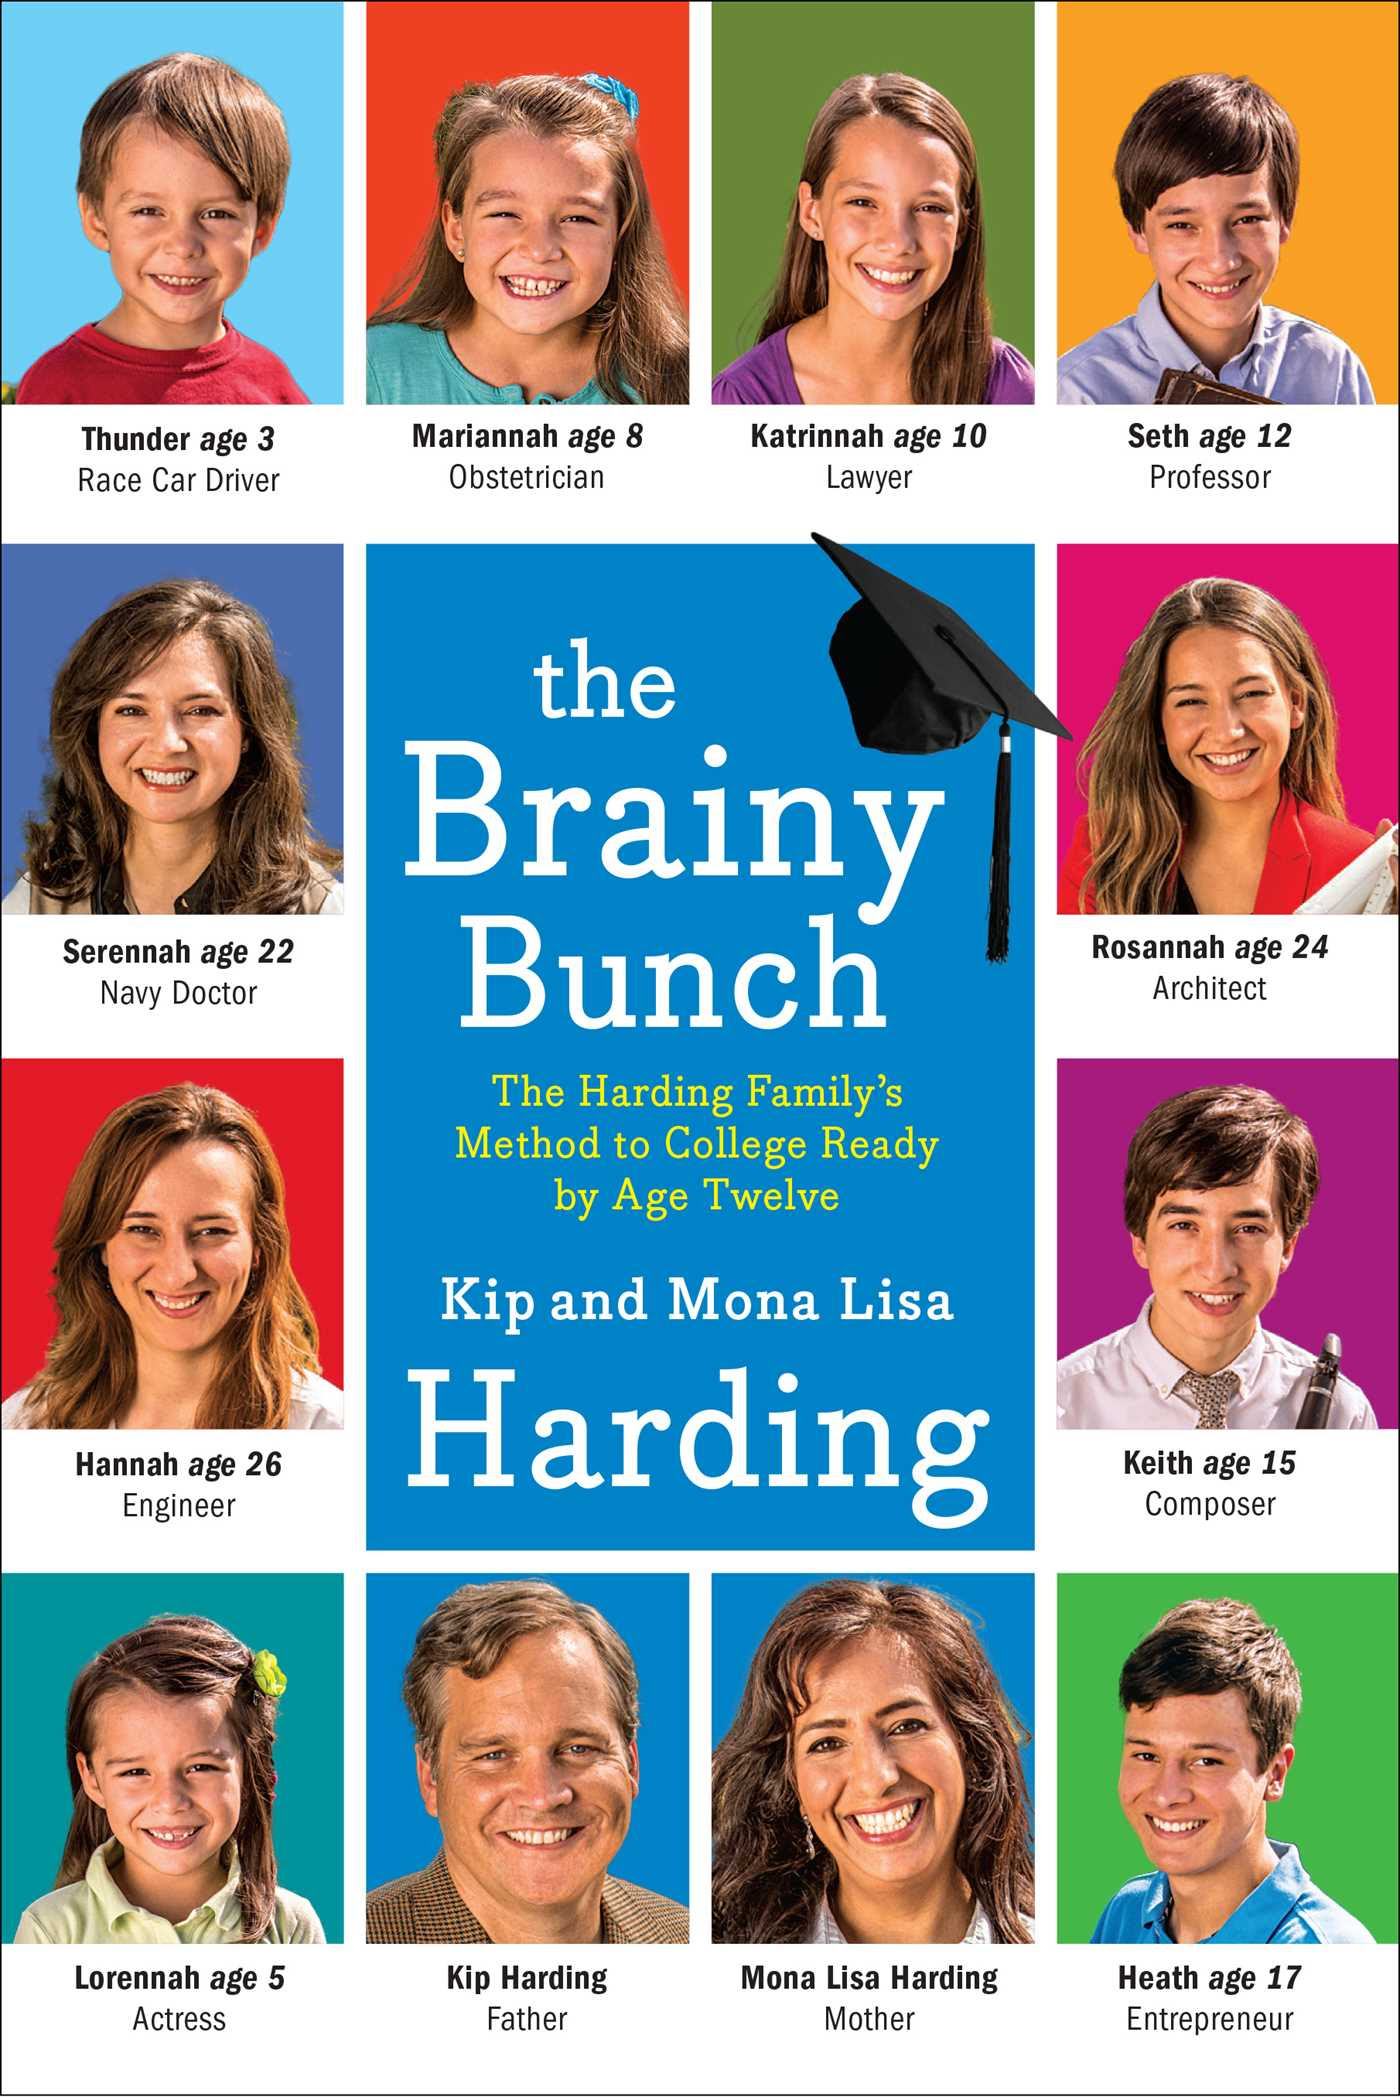 The Brainy Bunch: The Harding Family's Method to College Ready by Age Twelve PDF